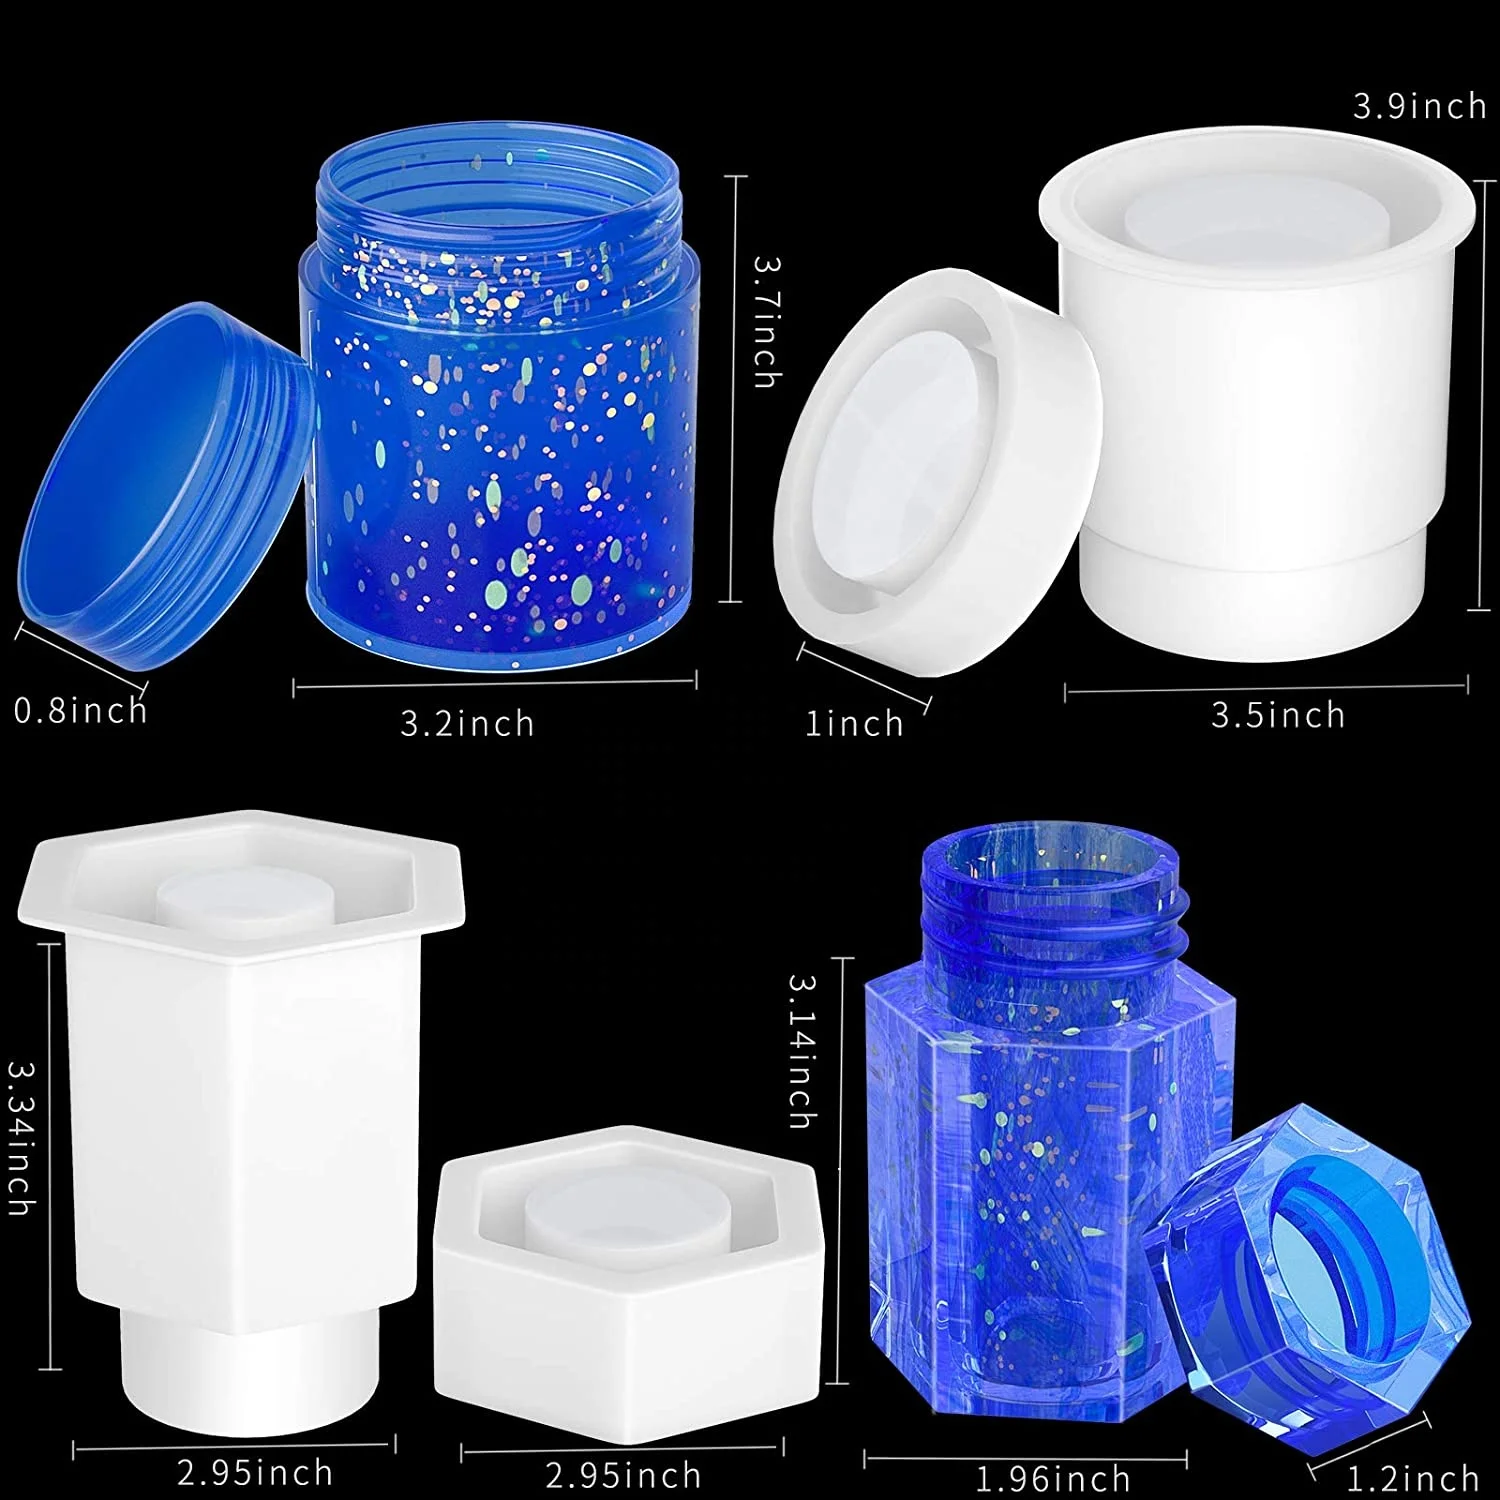 Resin Storage Bottle Container Silicone Epoxy Resin Mold for DIY Jewelry Container Decorative Resin Crafts Box Resin Mold with Lid Storage Box Mold Bottle Resin Mold 